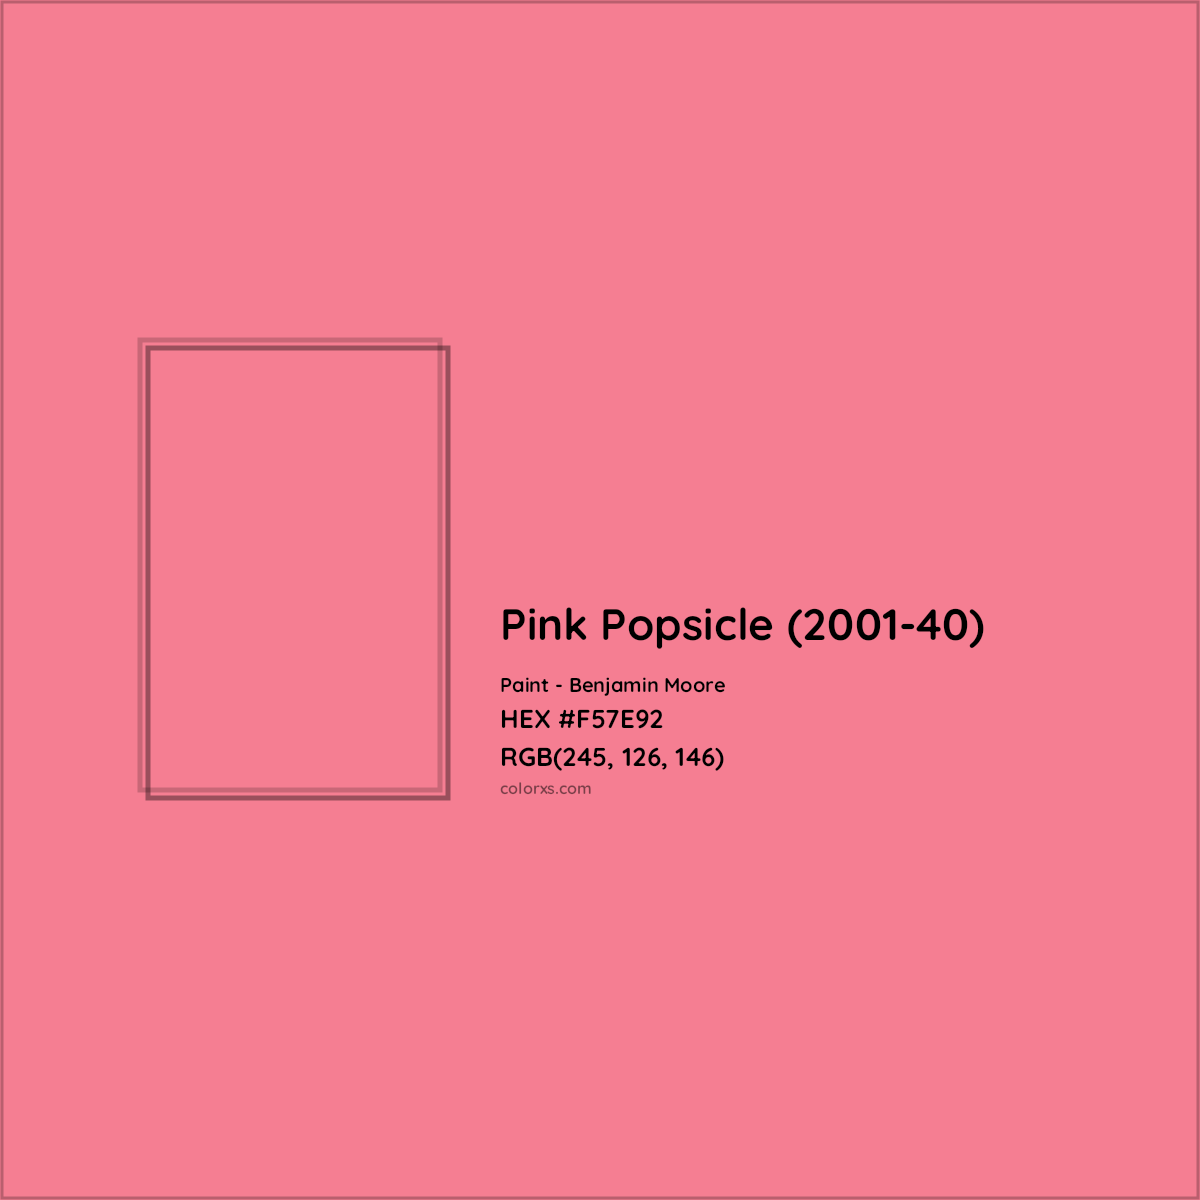 HEX #F57E92 Pink Popsicle (2001-40) Paint Benjamin Moore - Color Code